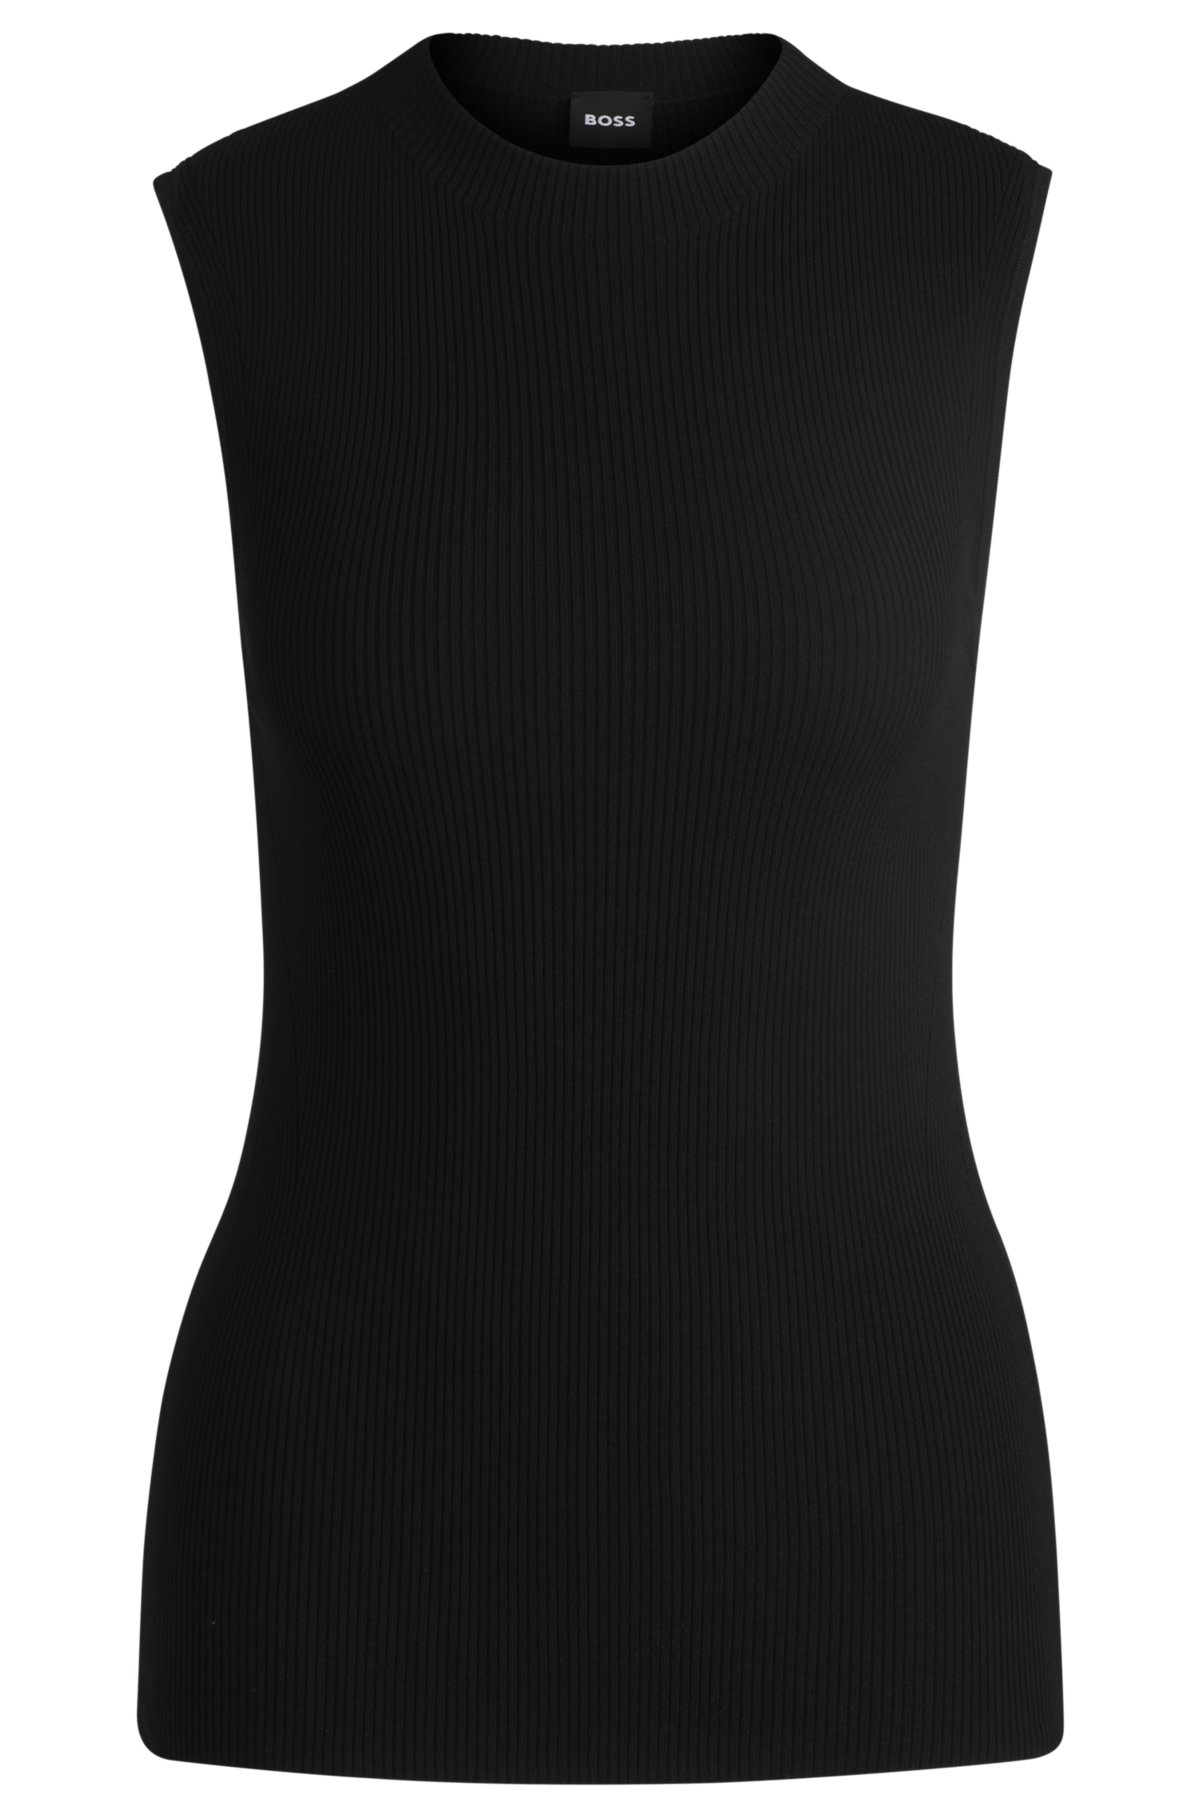 Sleeveless mock-neck top in ribbed fabric, Black